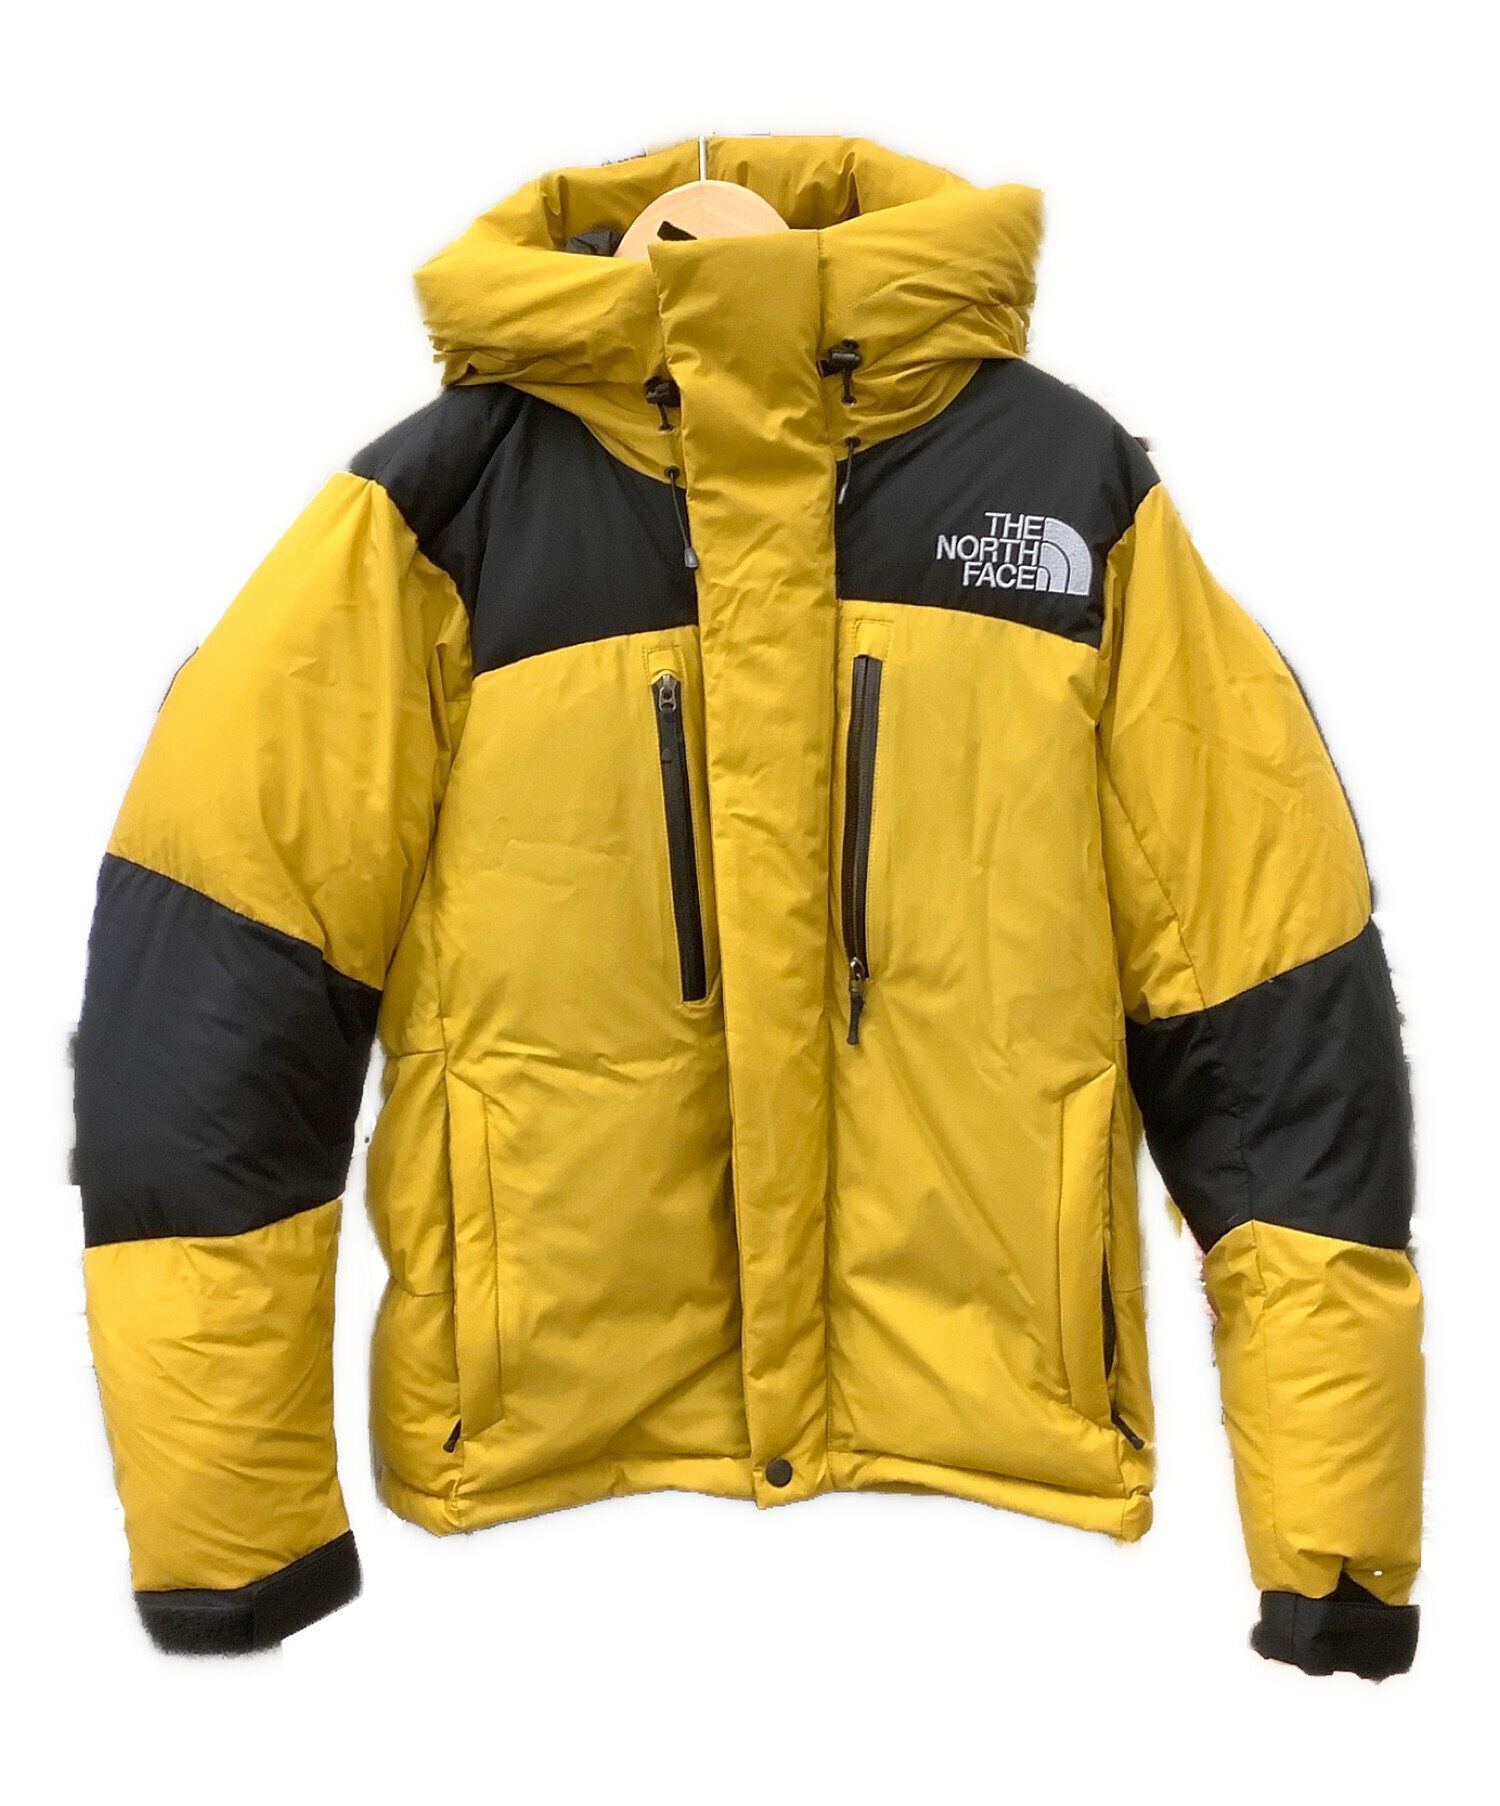 THE NORTH FACE バルトロライトジャケット　サイズSバルトロライトジャケット